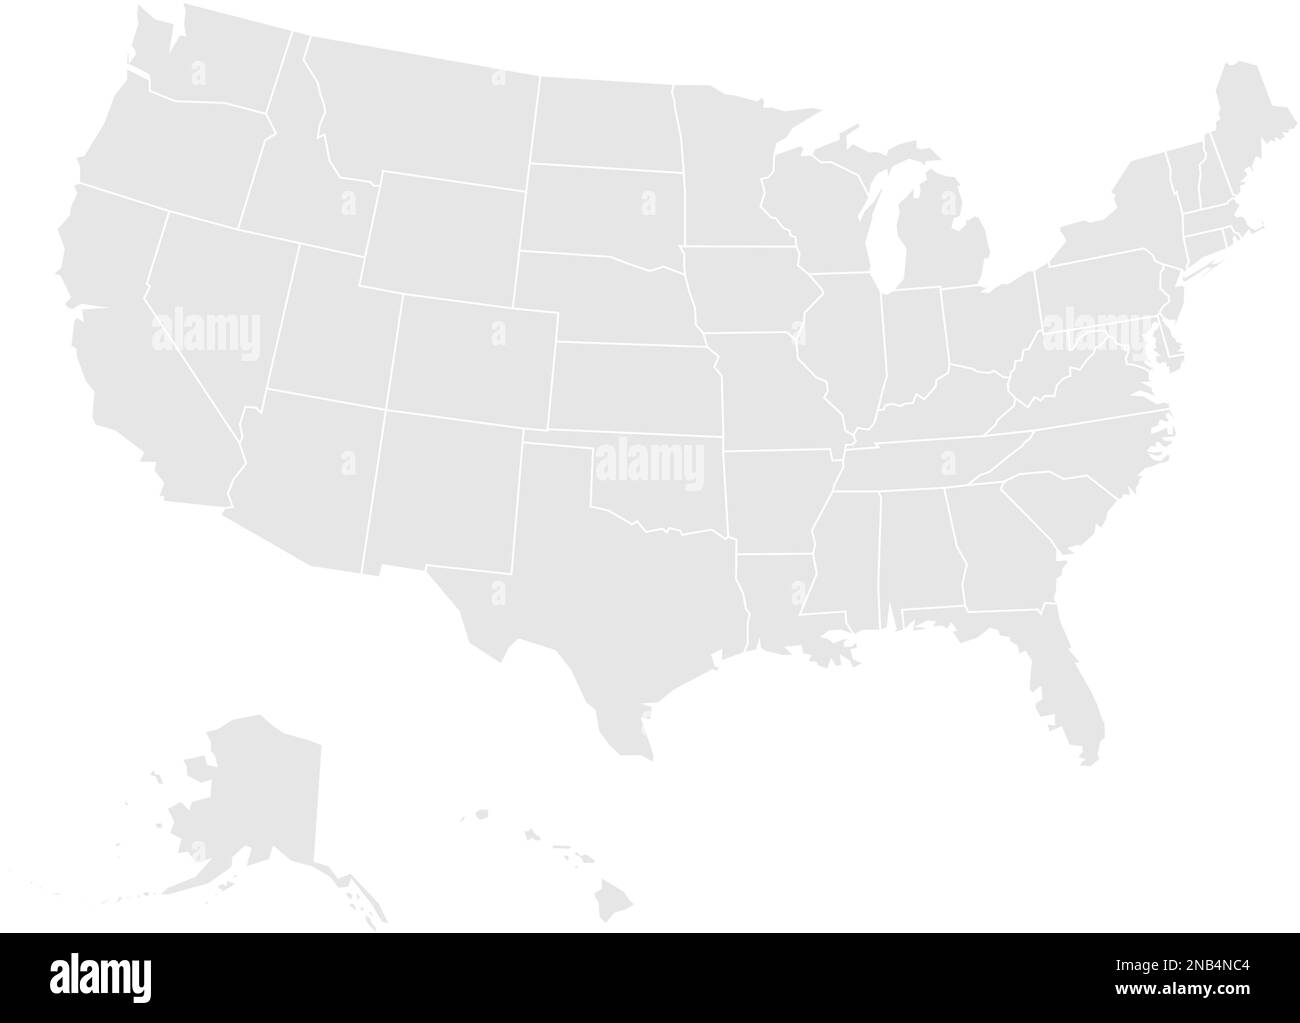 Blank map of United states of America. Vector illustration in grey on white background. Stock Vector